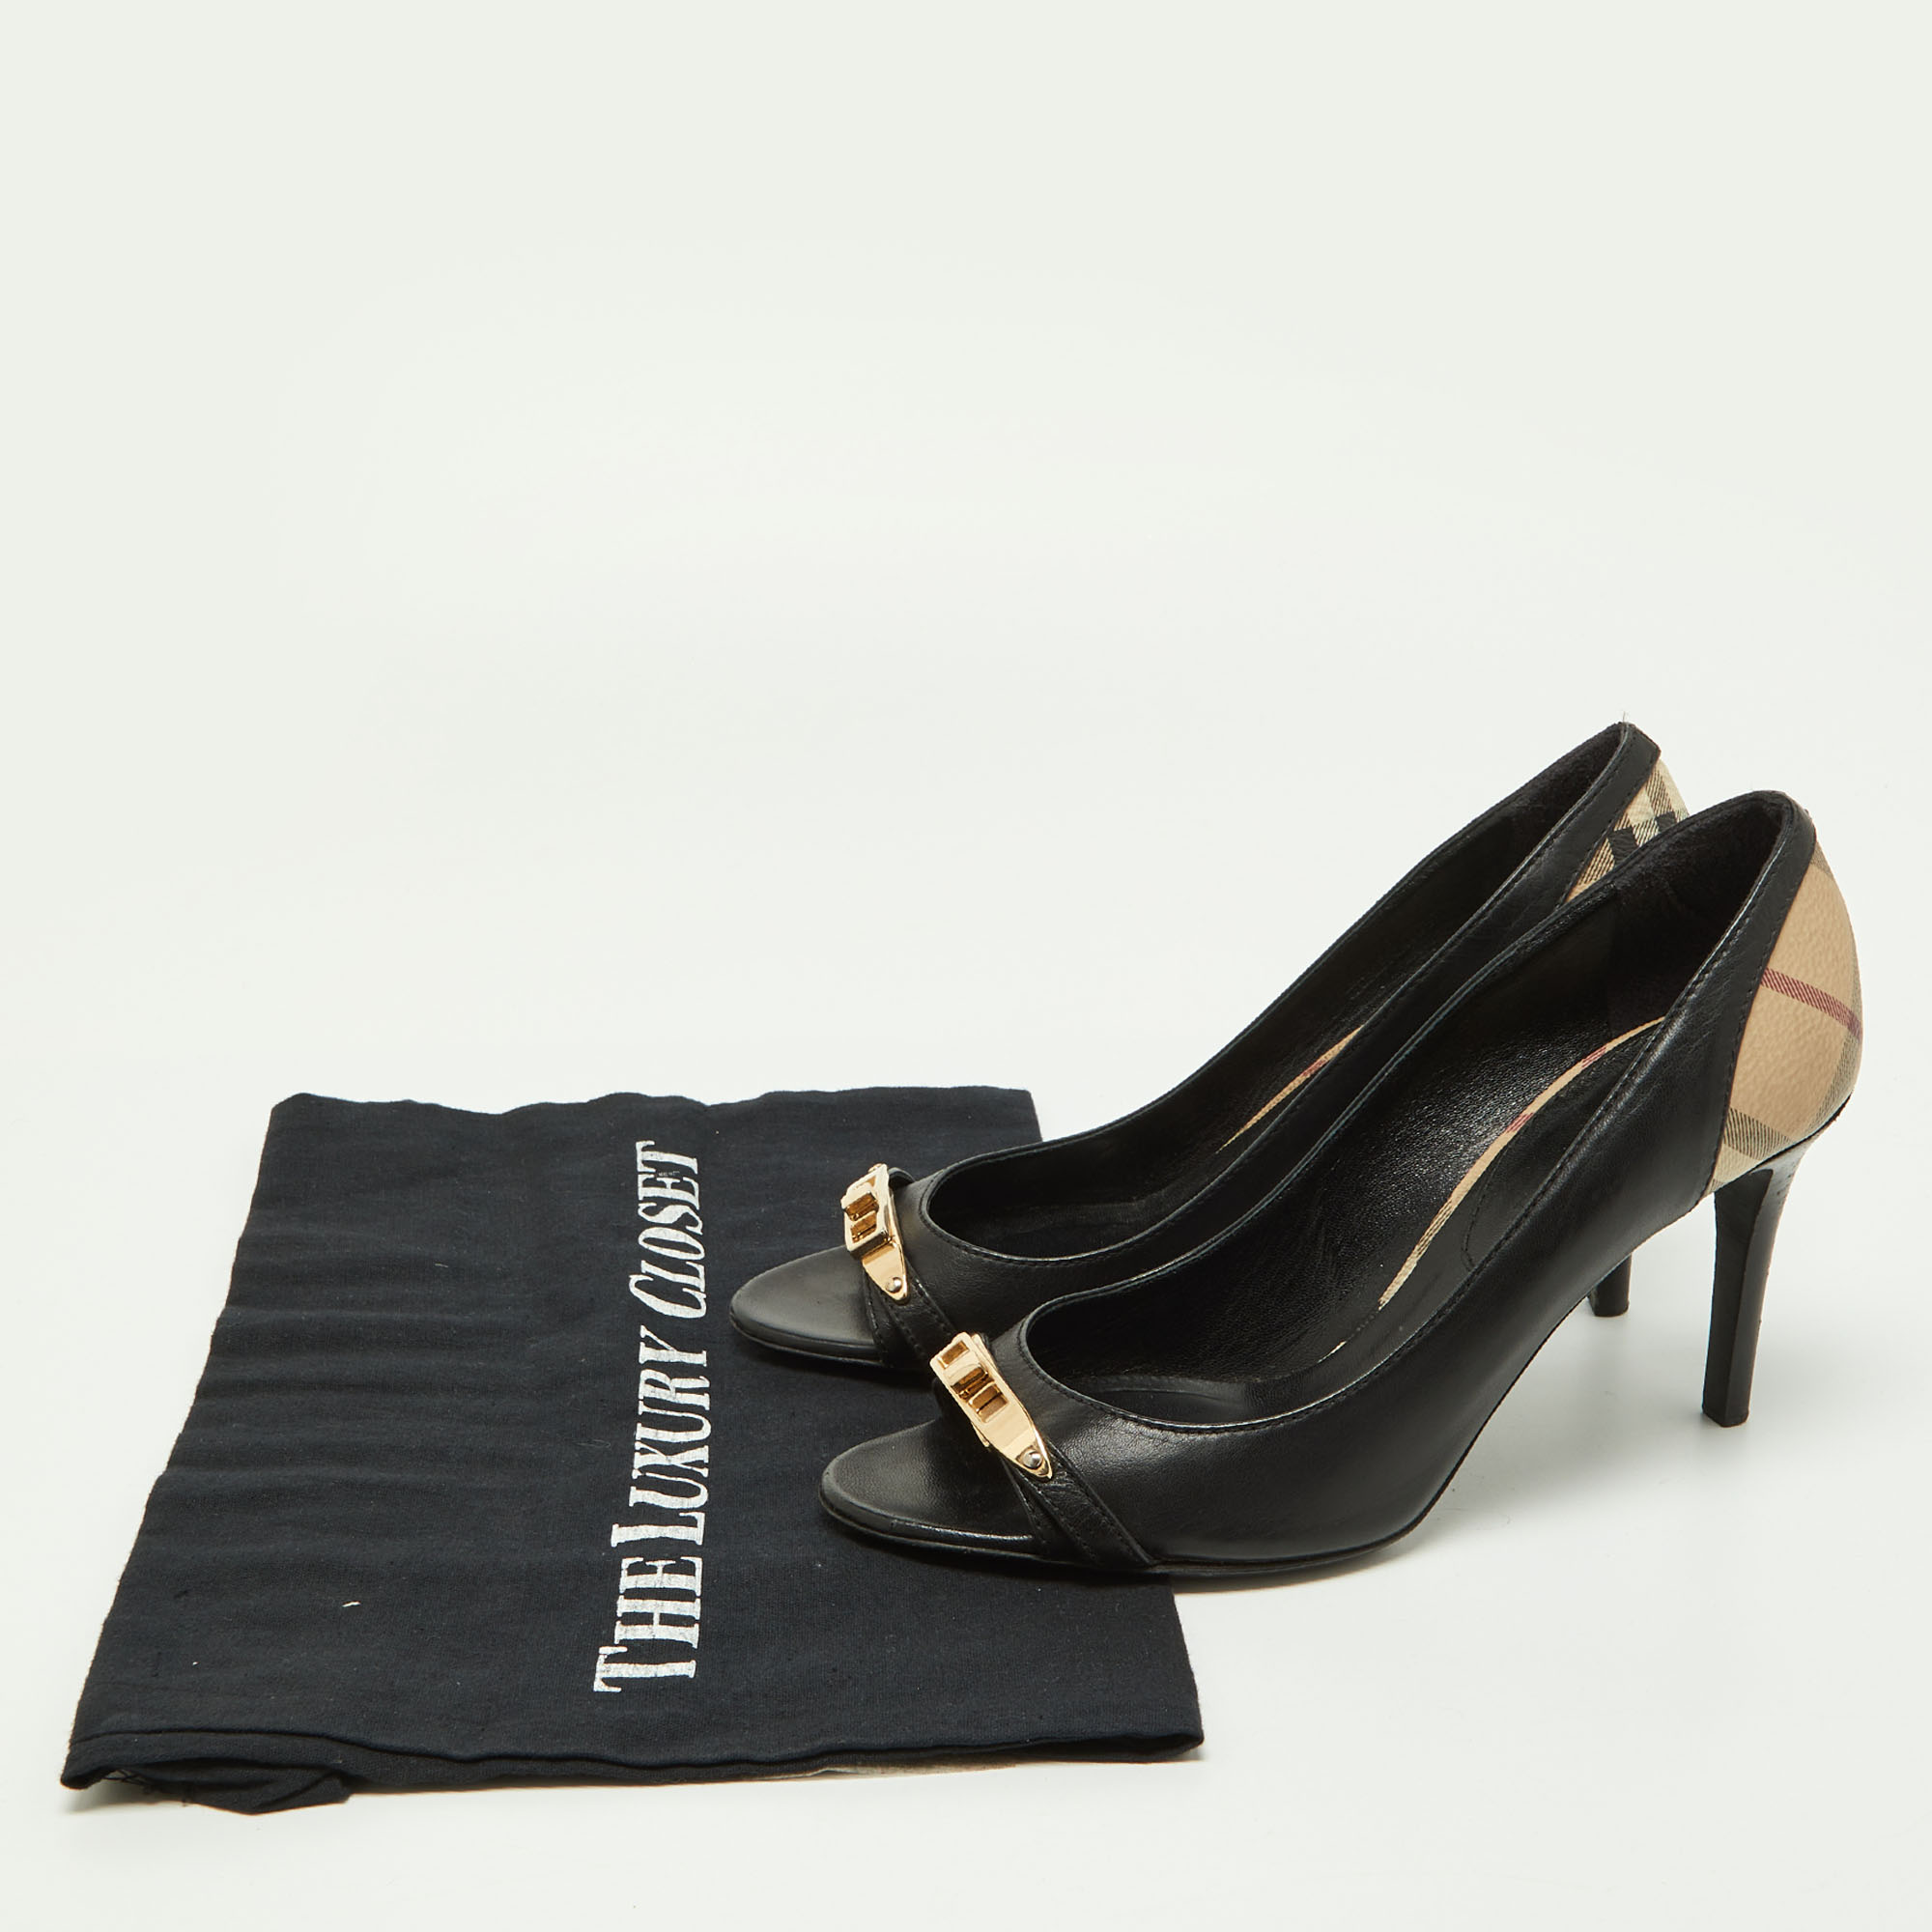 Burberry Black/Beige Leather And Check Coated Canvas Embellished Open Toe Pumps Size 37